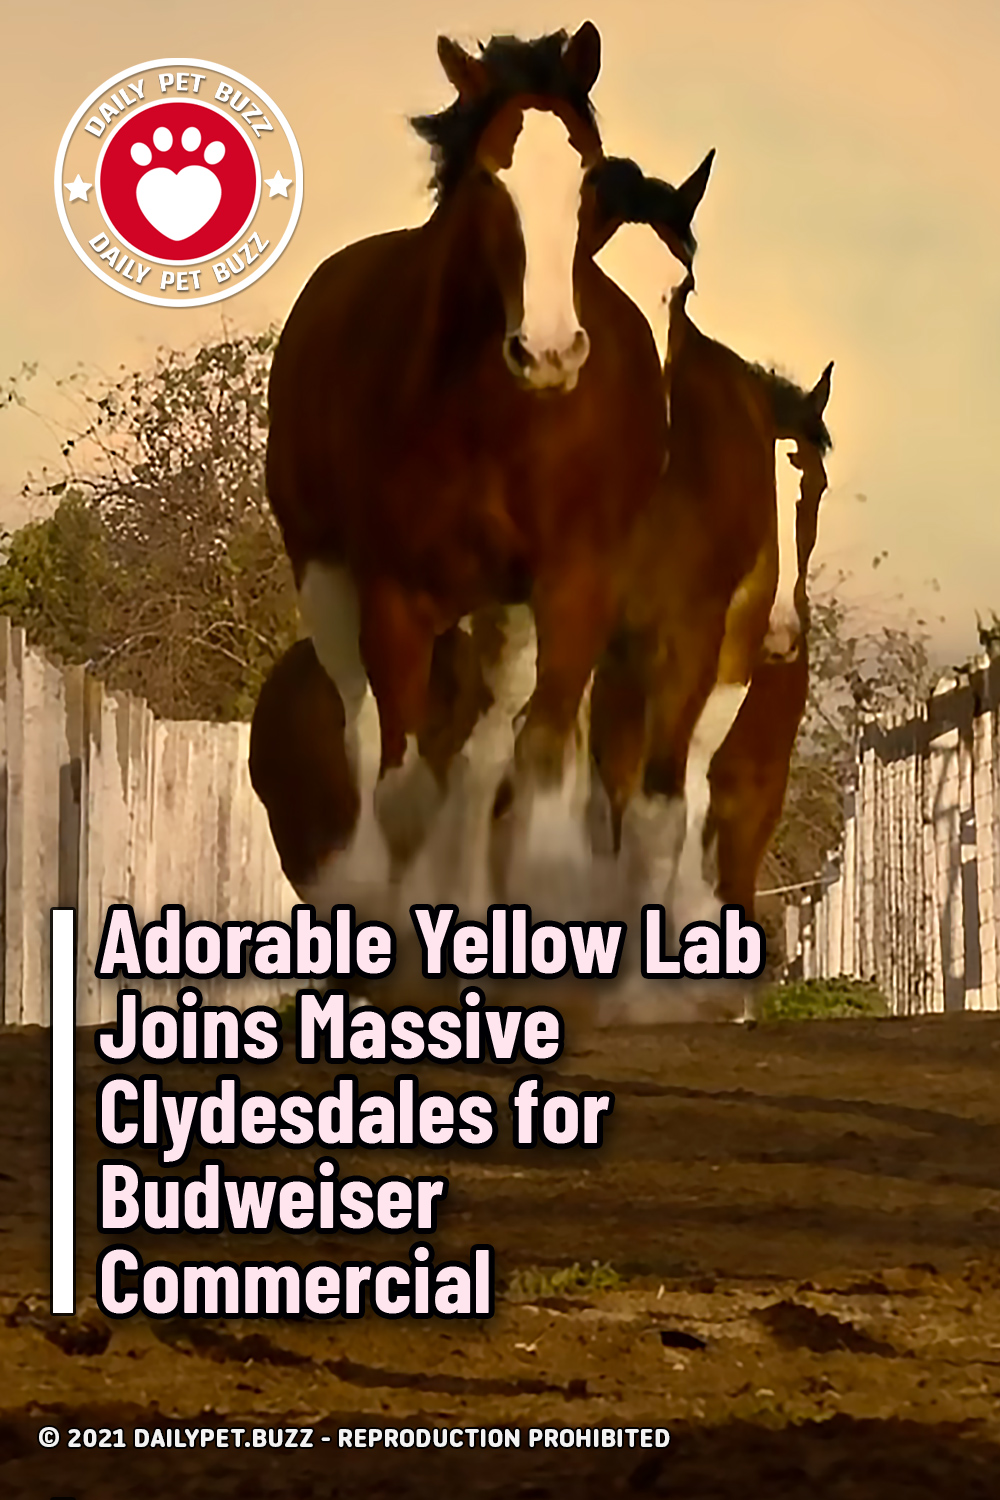 Adorable Yellow Lab Joins Massive Clydesdales for Budweiser Commercial